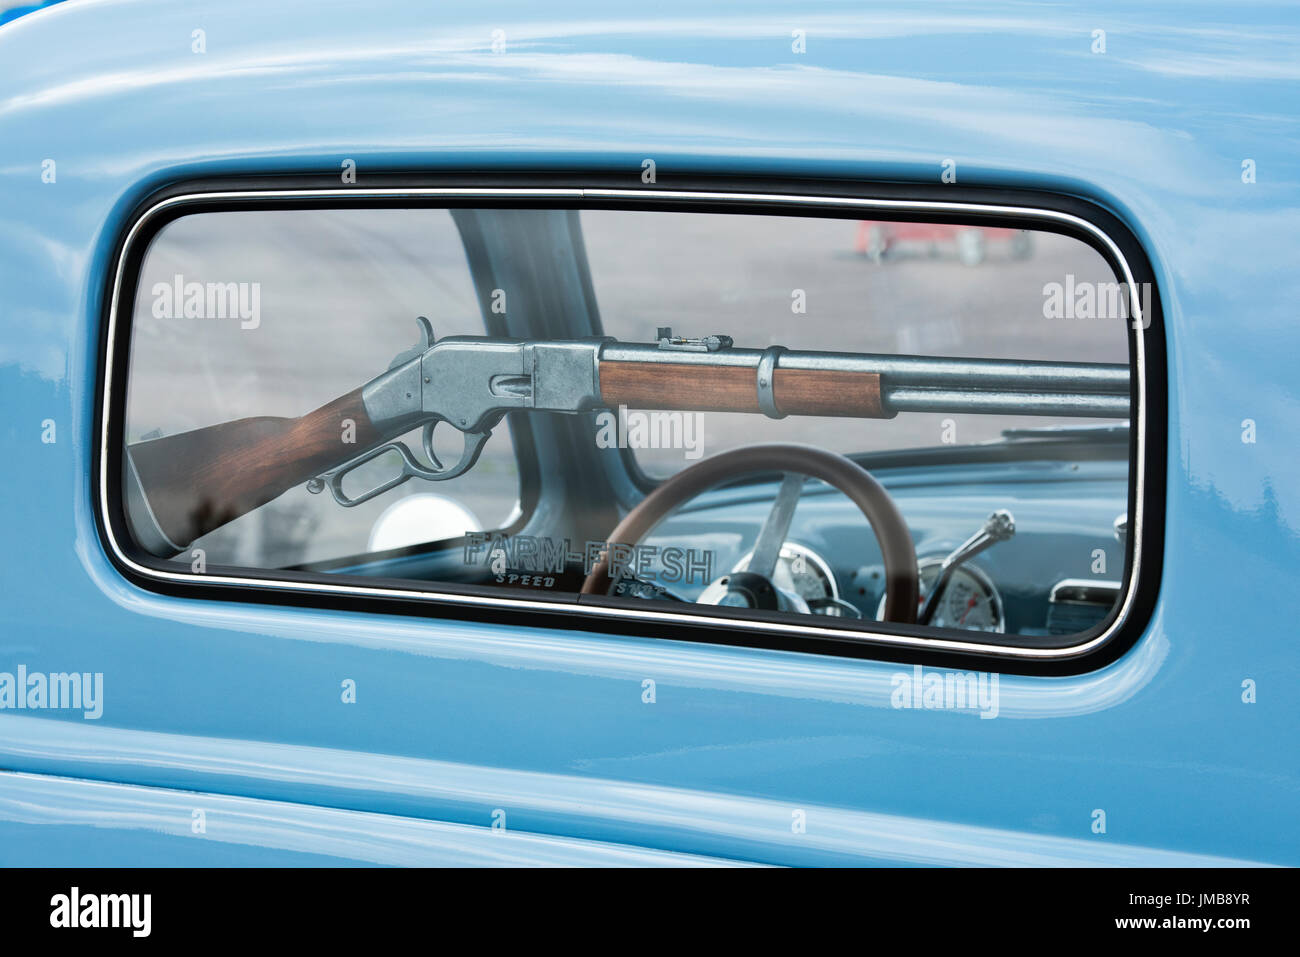 Replica winchester rifle in the rear window of a 1953 Custom Chevrolet pick up truck at an American car show. Essex. UK Stock Photo